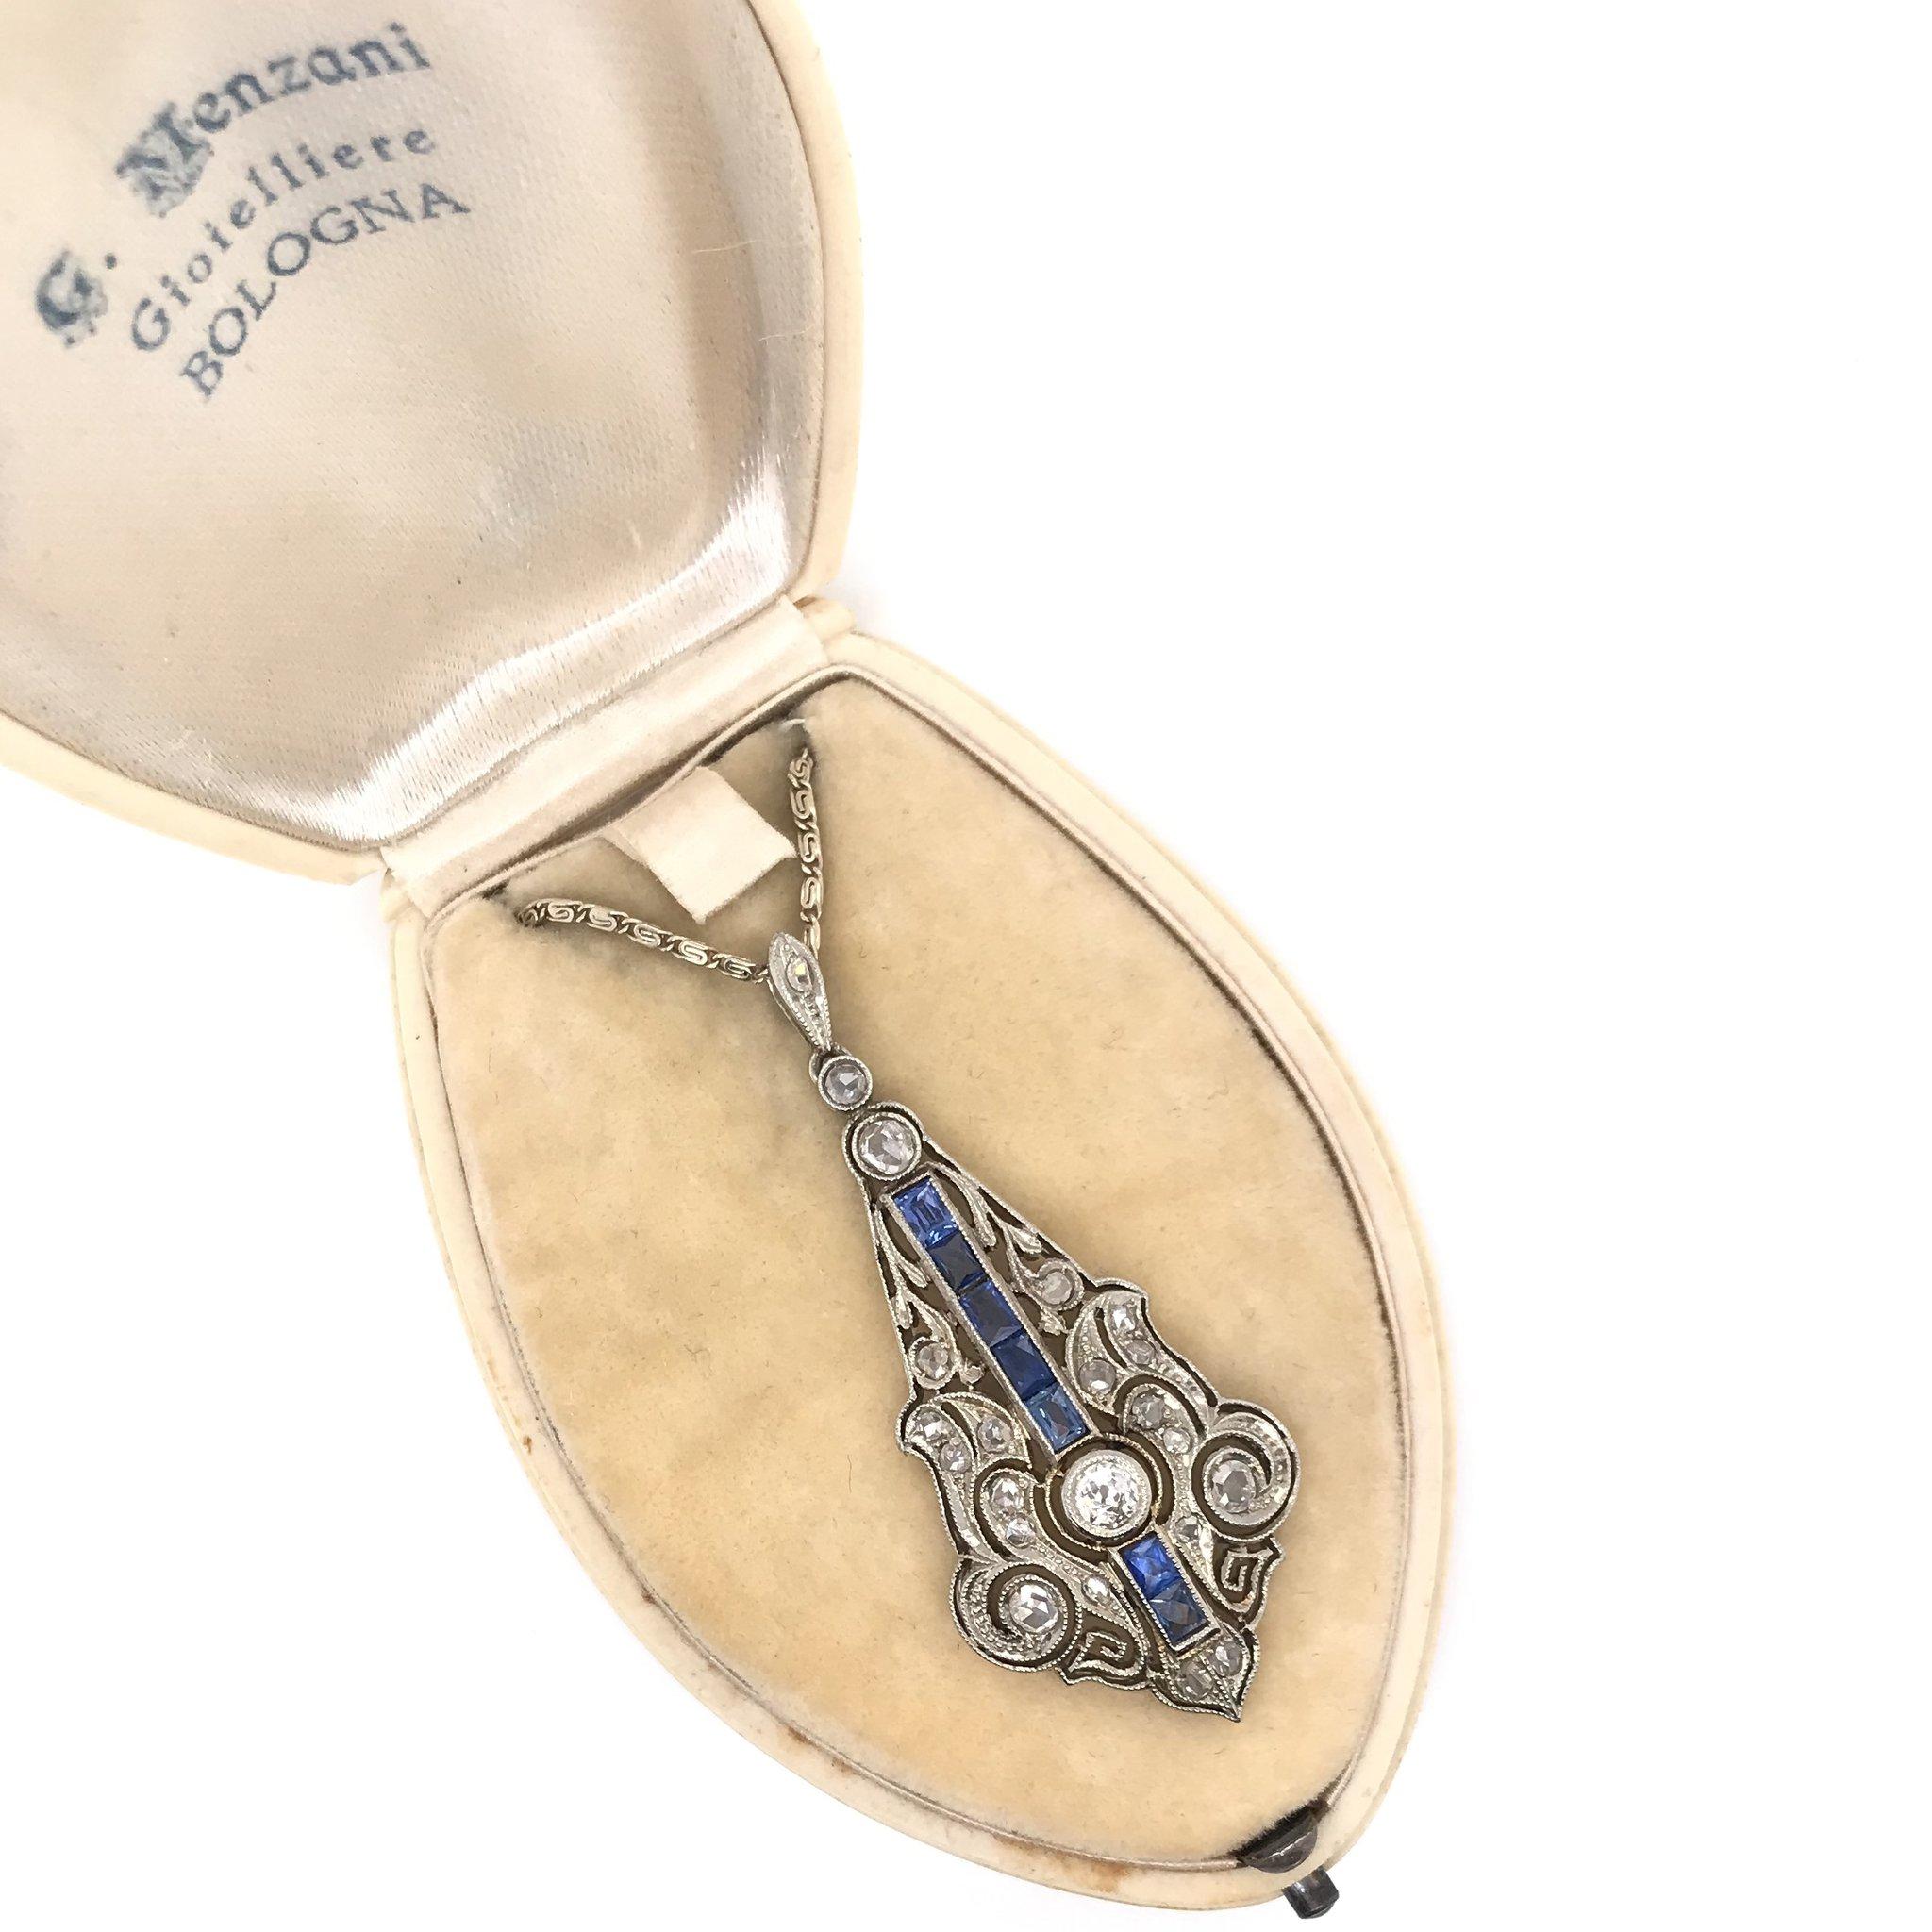 This antique piece was handcrafted sometime during the Art Deco design period ( 1920-1940 ). This exquisite antique necklace features a platinum, sapphire, and diamond pendant on a custom antique 14k white gold chain. The platinum pendant features